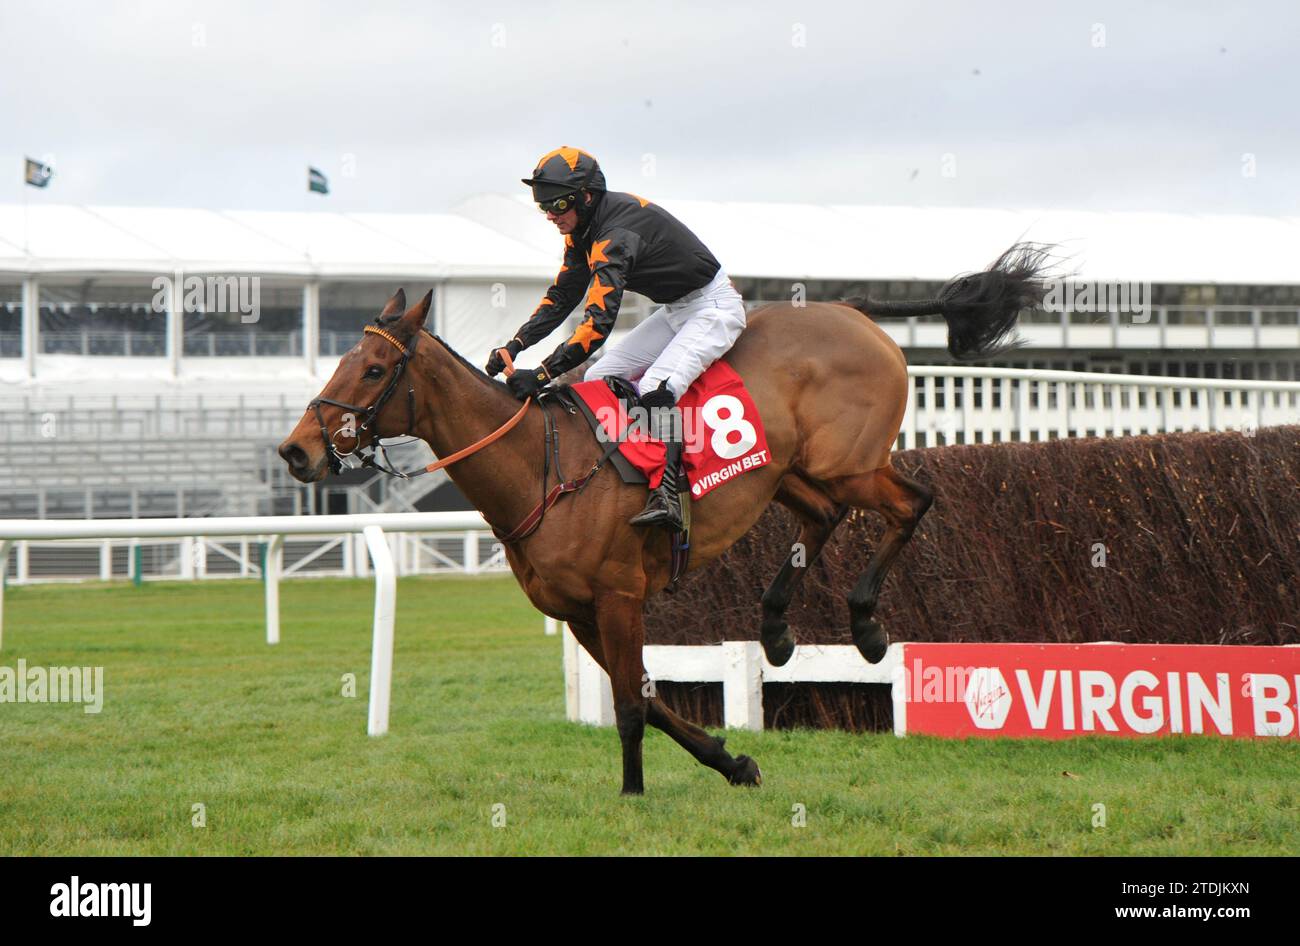 Racing at Cheltenham Day 2 of the Christmas Meet   Race 4 The Virgin Bet December Gold Cup Handicap Chase    Do Your Job ridden by Derek Fox jumps the Stock Photo